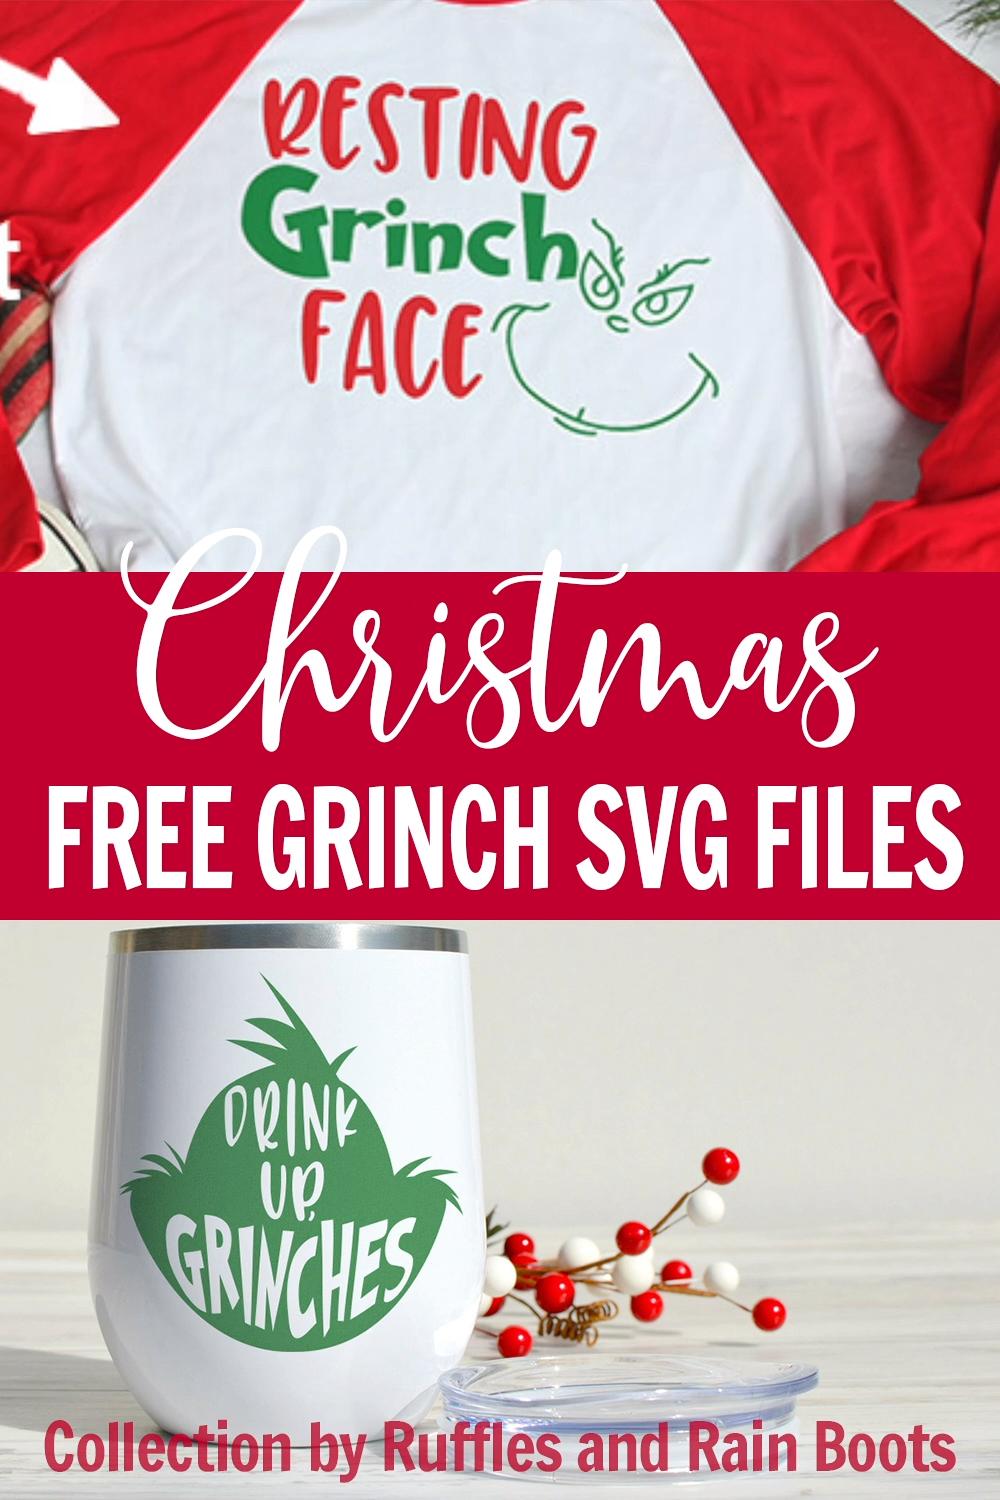 Free Grinch SVG Files for Holiday Crafts -   16 holiday Crafts cricut ideas